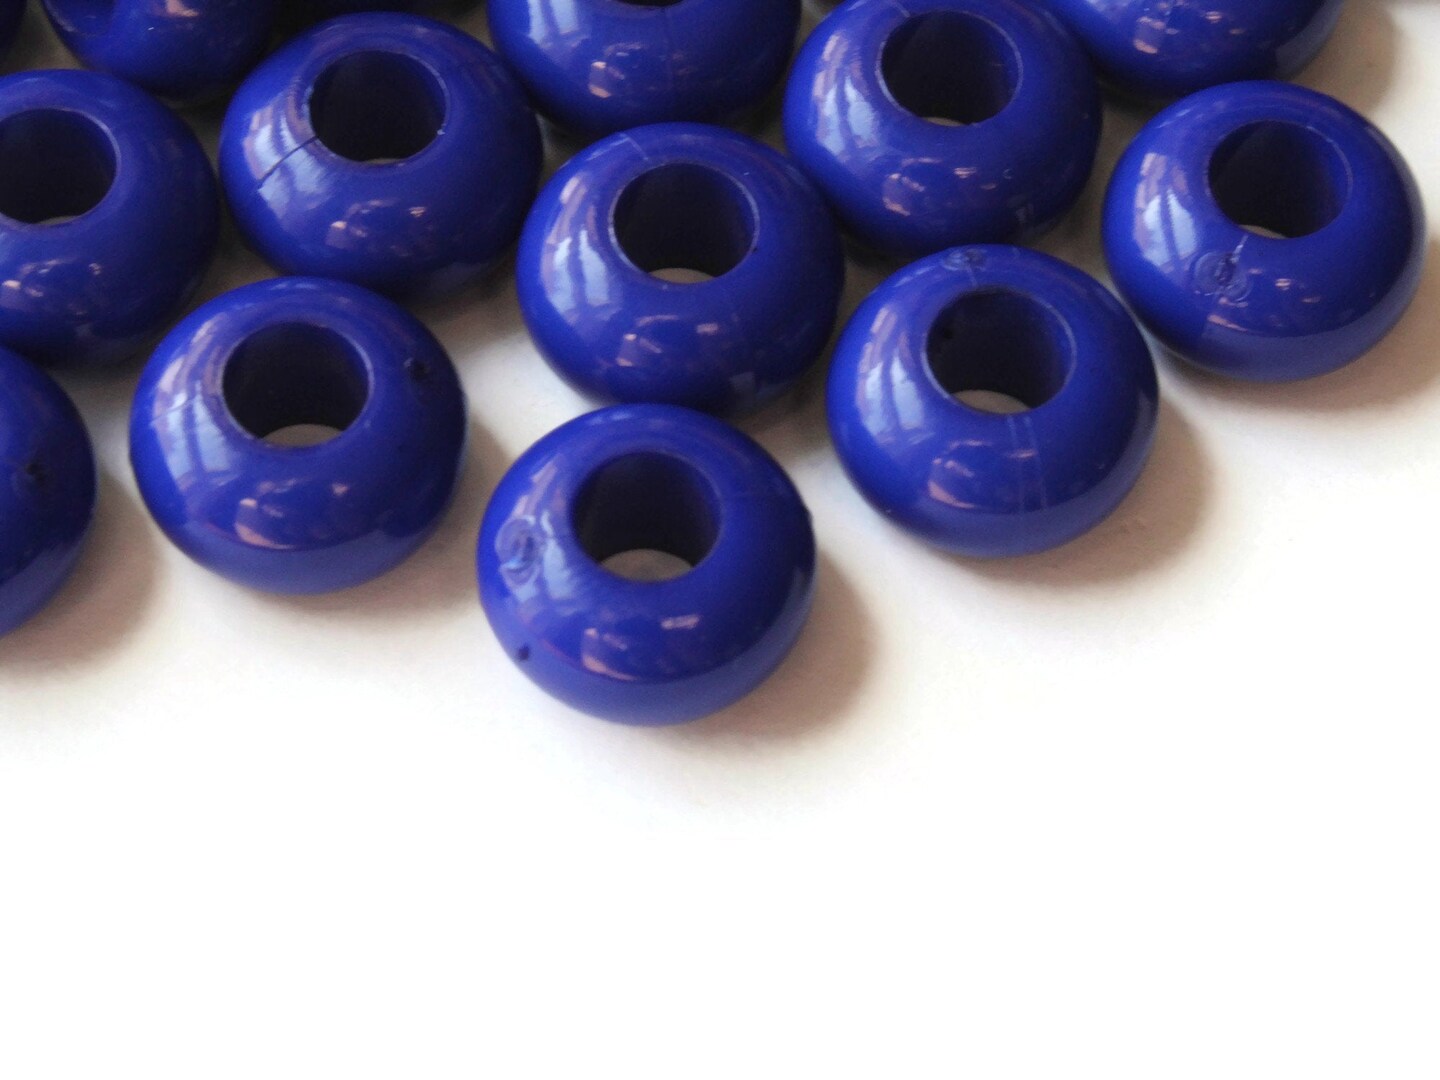 30 14mm x 8mm Large Hole Purple Beads Macrame Plastic Rondelle Beads by Smileyboy | Michaels